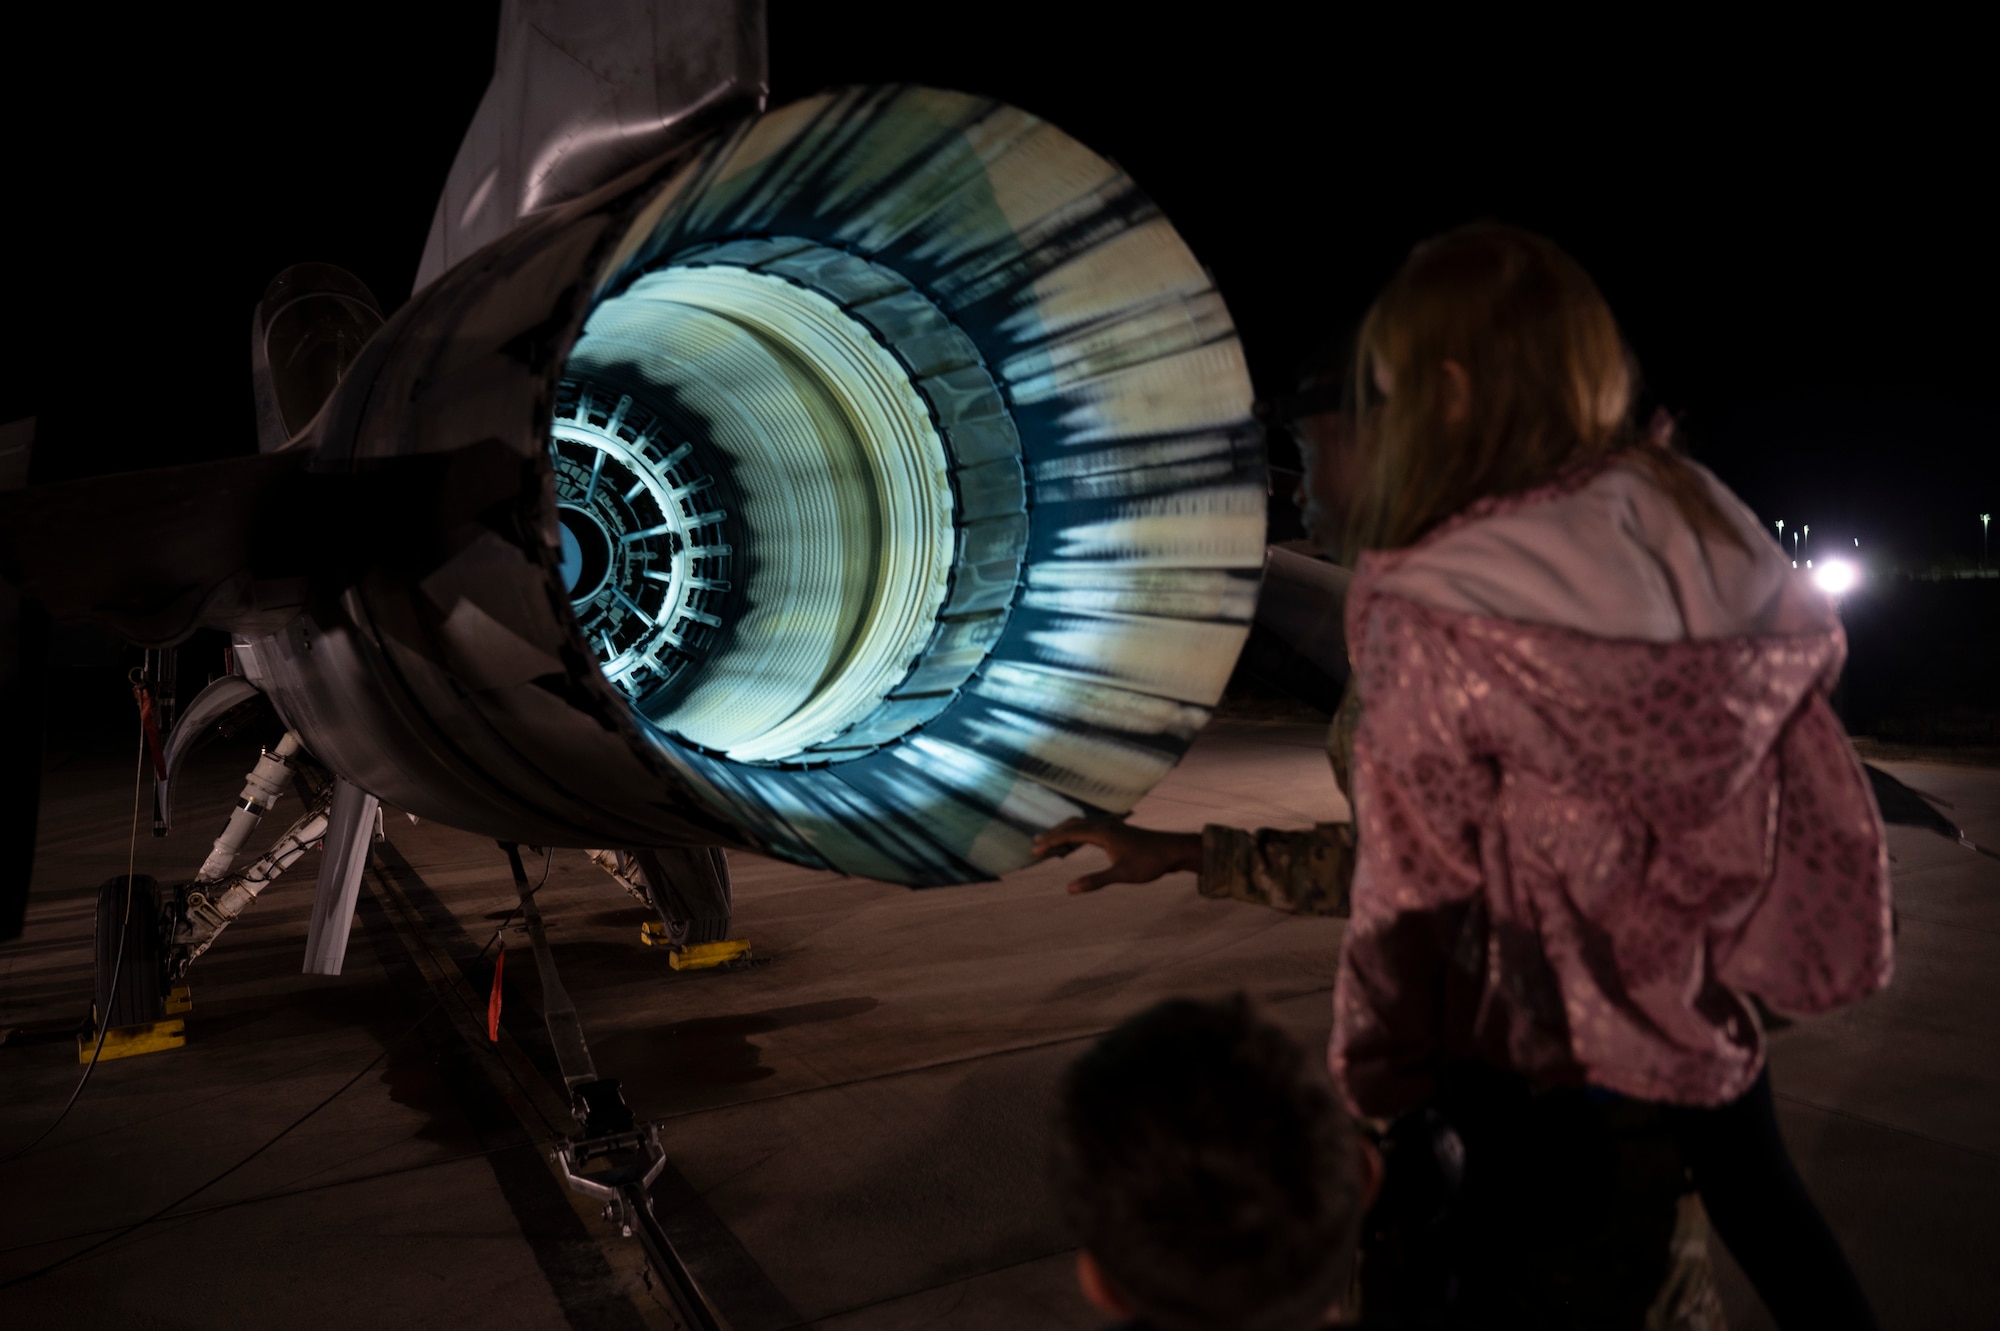 An Airman from the 311th Aircraft Maintanence Unit explains various parts of the F-16 Viper exhaust to a child at an afterburner operation at Holloman Air Force Base, New Mexico, Nov. 16, 2023. Afterburner operation occurs when raw jet fuel is injected into the engine augmenter, resulting in a long cone of fire out of the exhaust and generating twenty-four thousand pounds of thrust propelling the airframe. (U.S. Air Force photo by U.S. Air Force Airman 1st Class Michelle Ferrari)